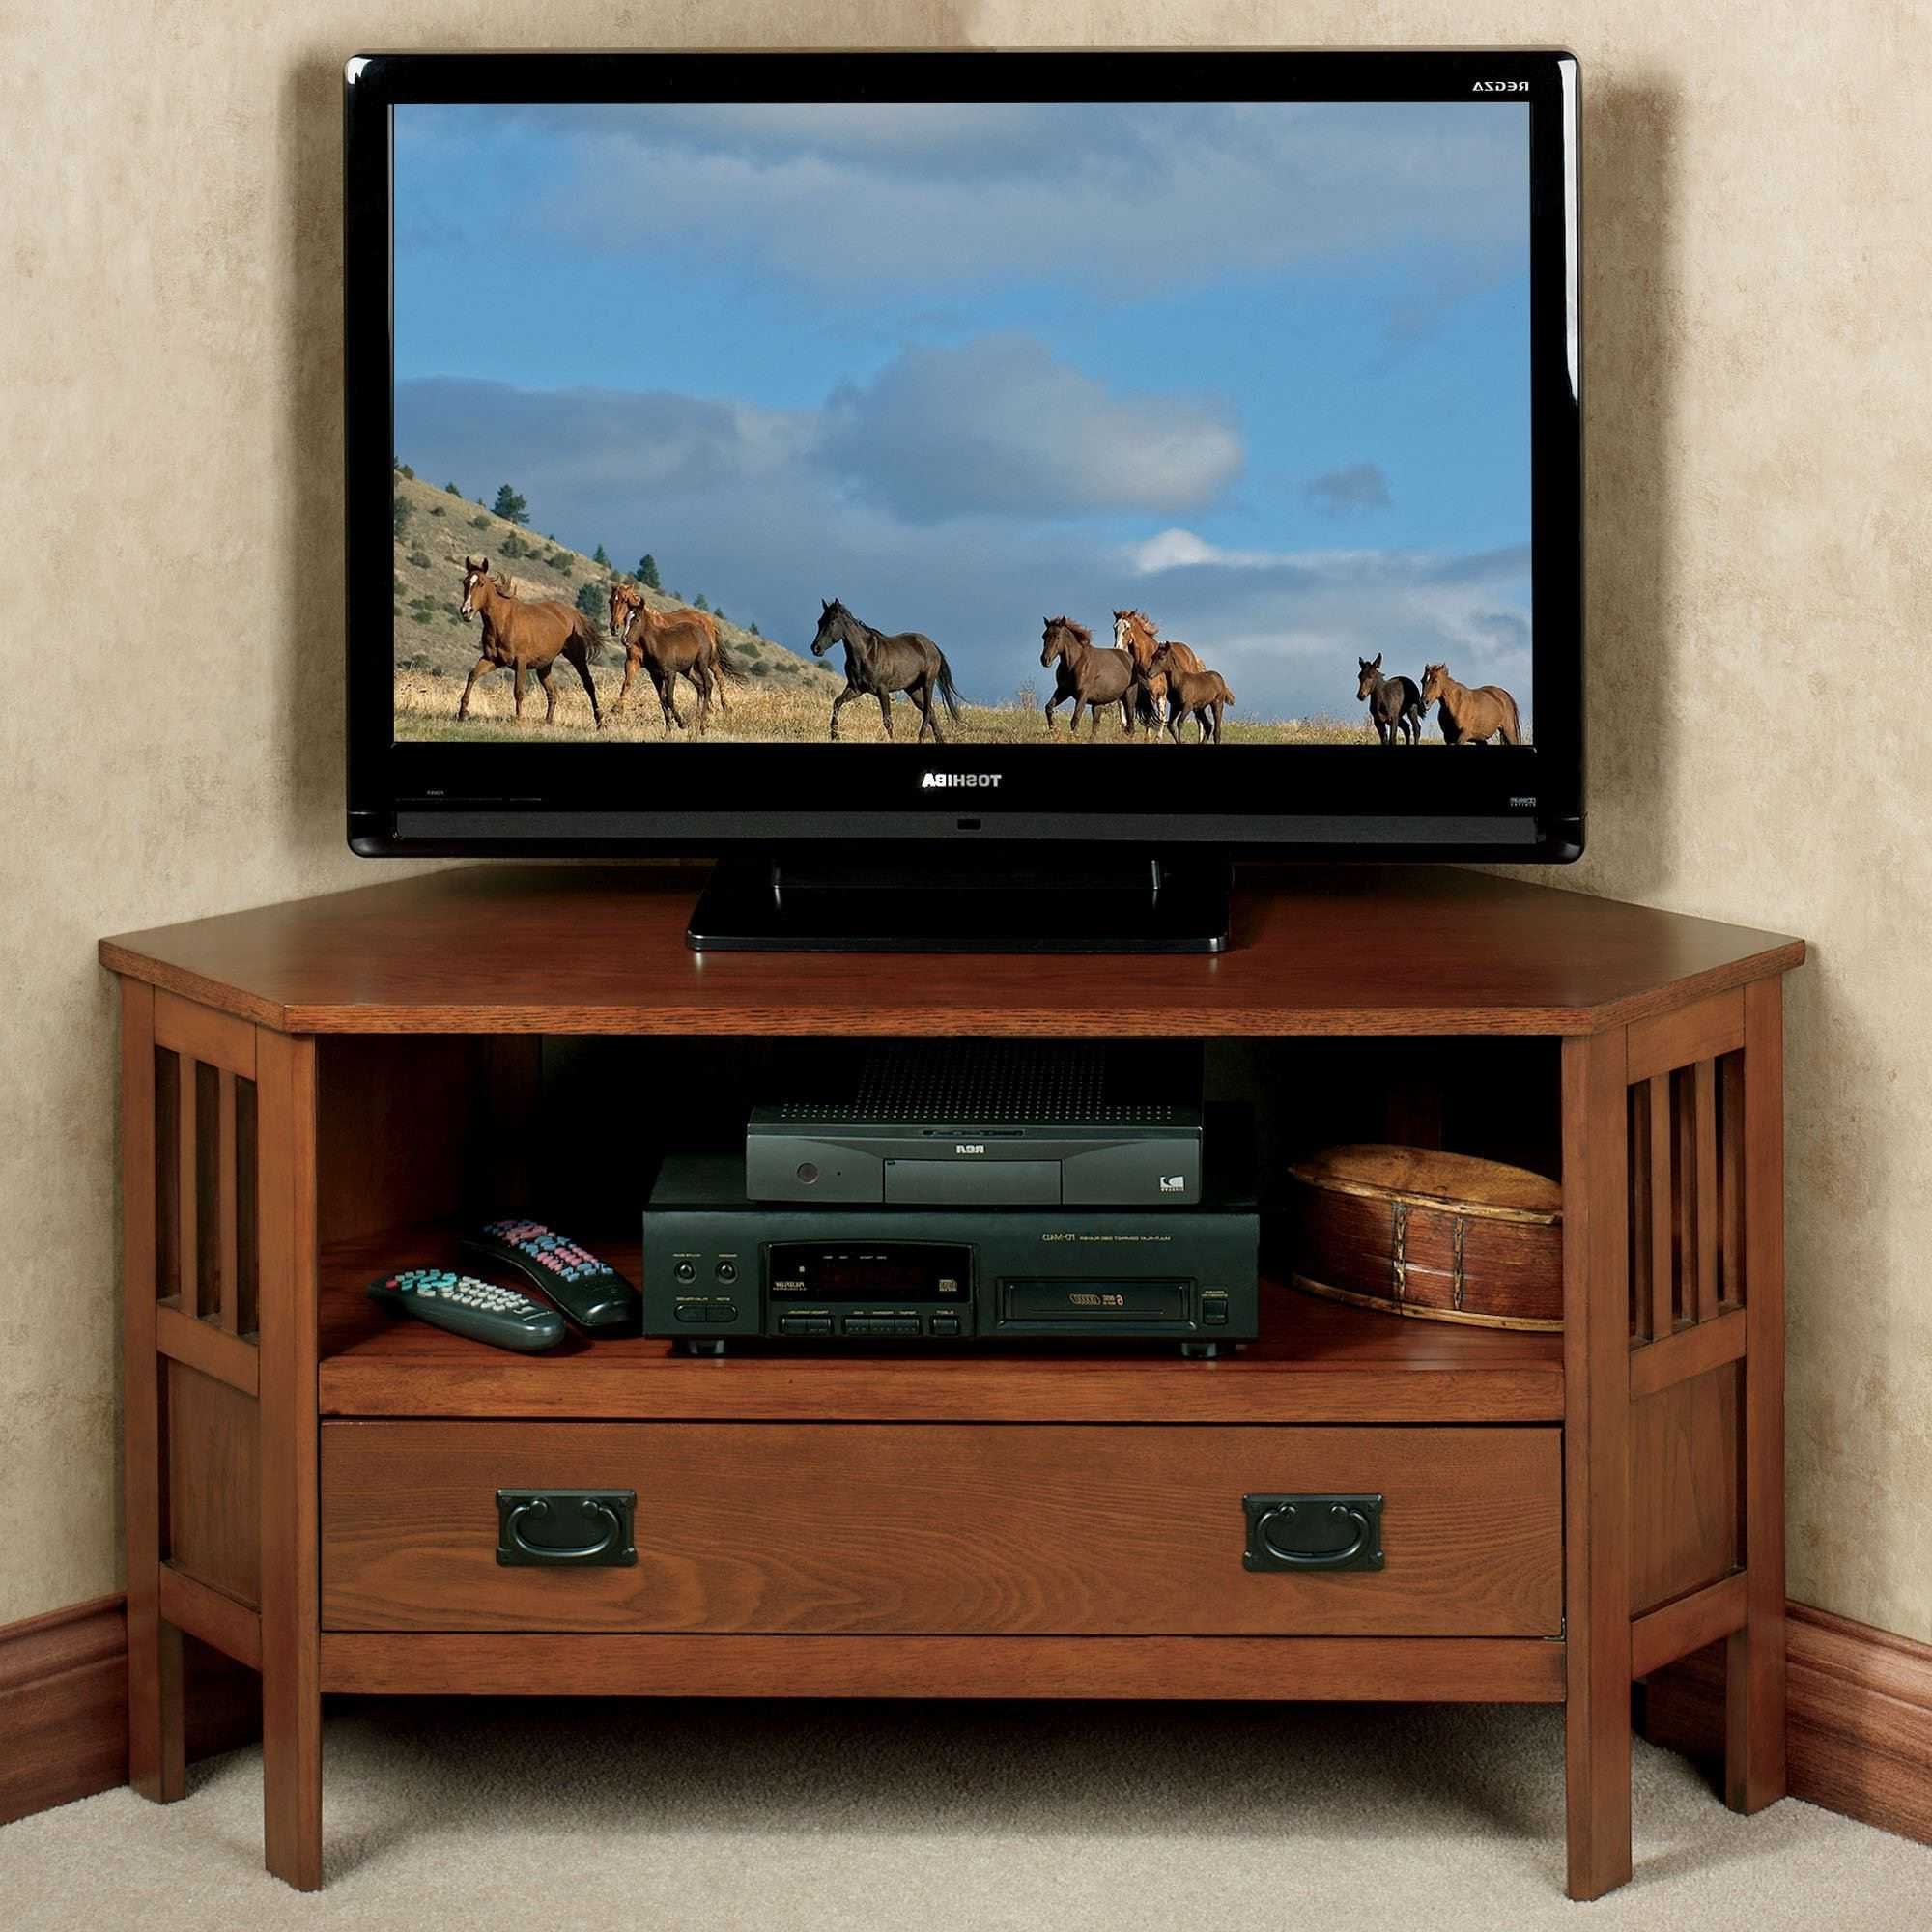 55 Inch Corner Tv Stands With Regard To Well Known Corner Tv Stand Amazon Tall For 60 Inch 55 Stands With Mount Drawers (View 11 of 20)